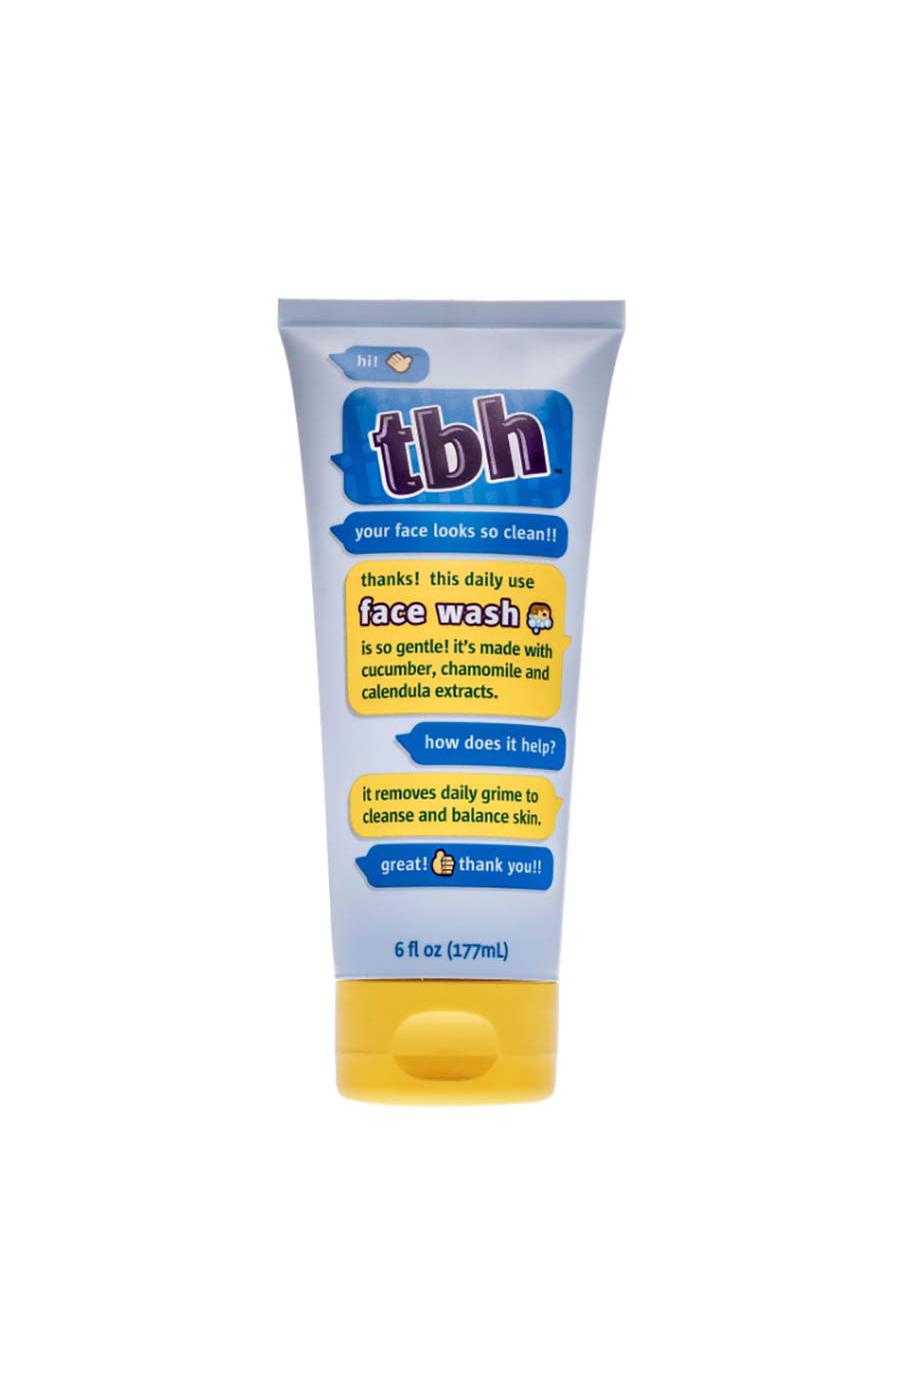 TBH Gentle Face Wash; image 1 of 2